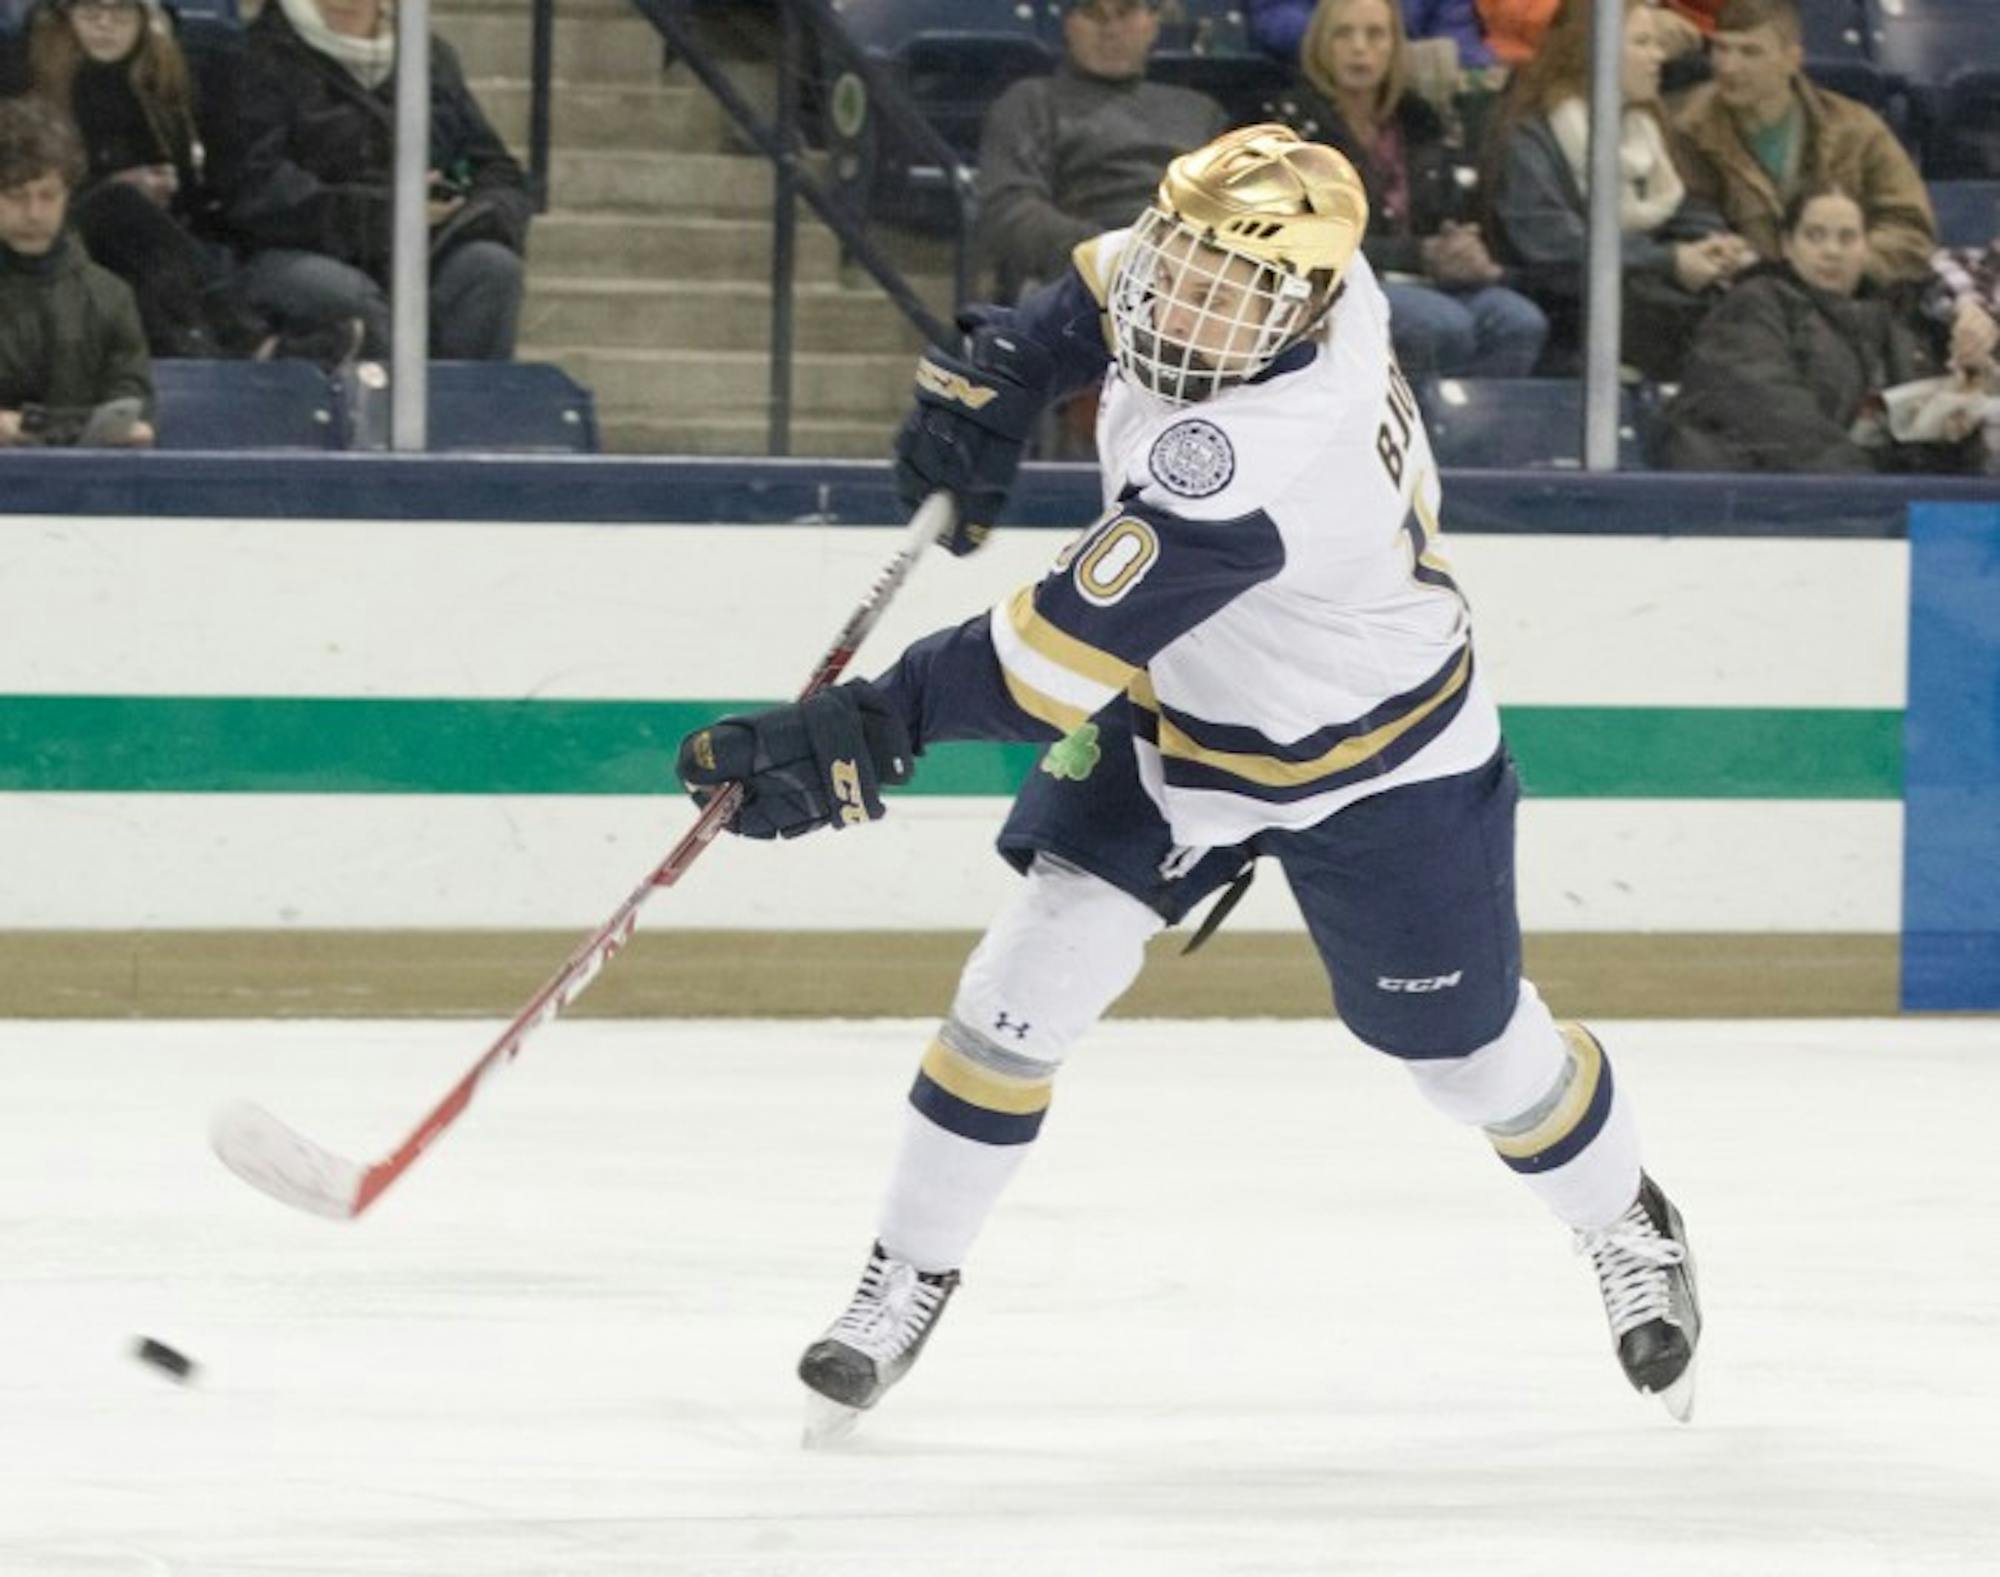 Irish sophomore left wing Anders Bjork snaps a shot on goal during Notre Dame’s 5-1 win over Massachusetts on Dec. 5.